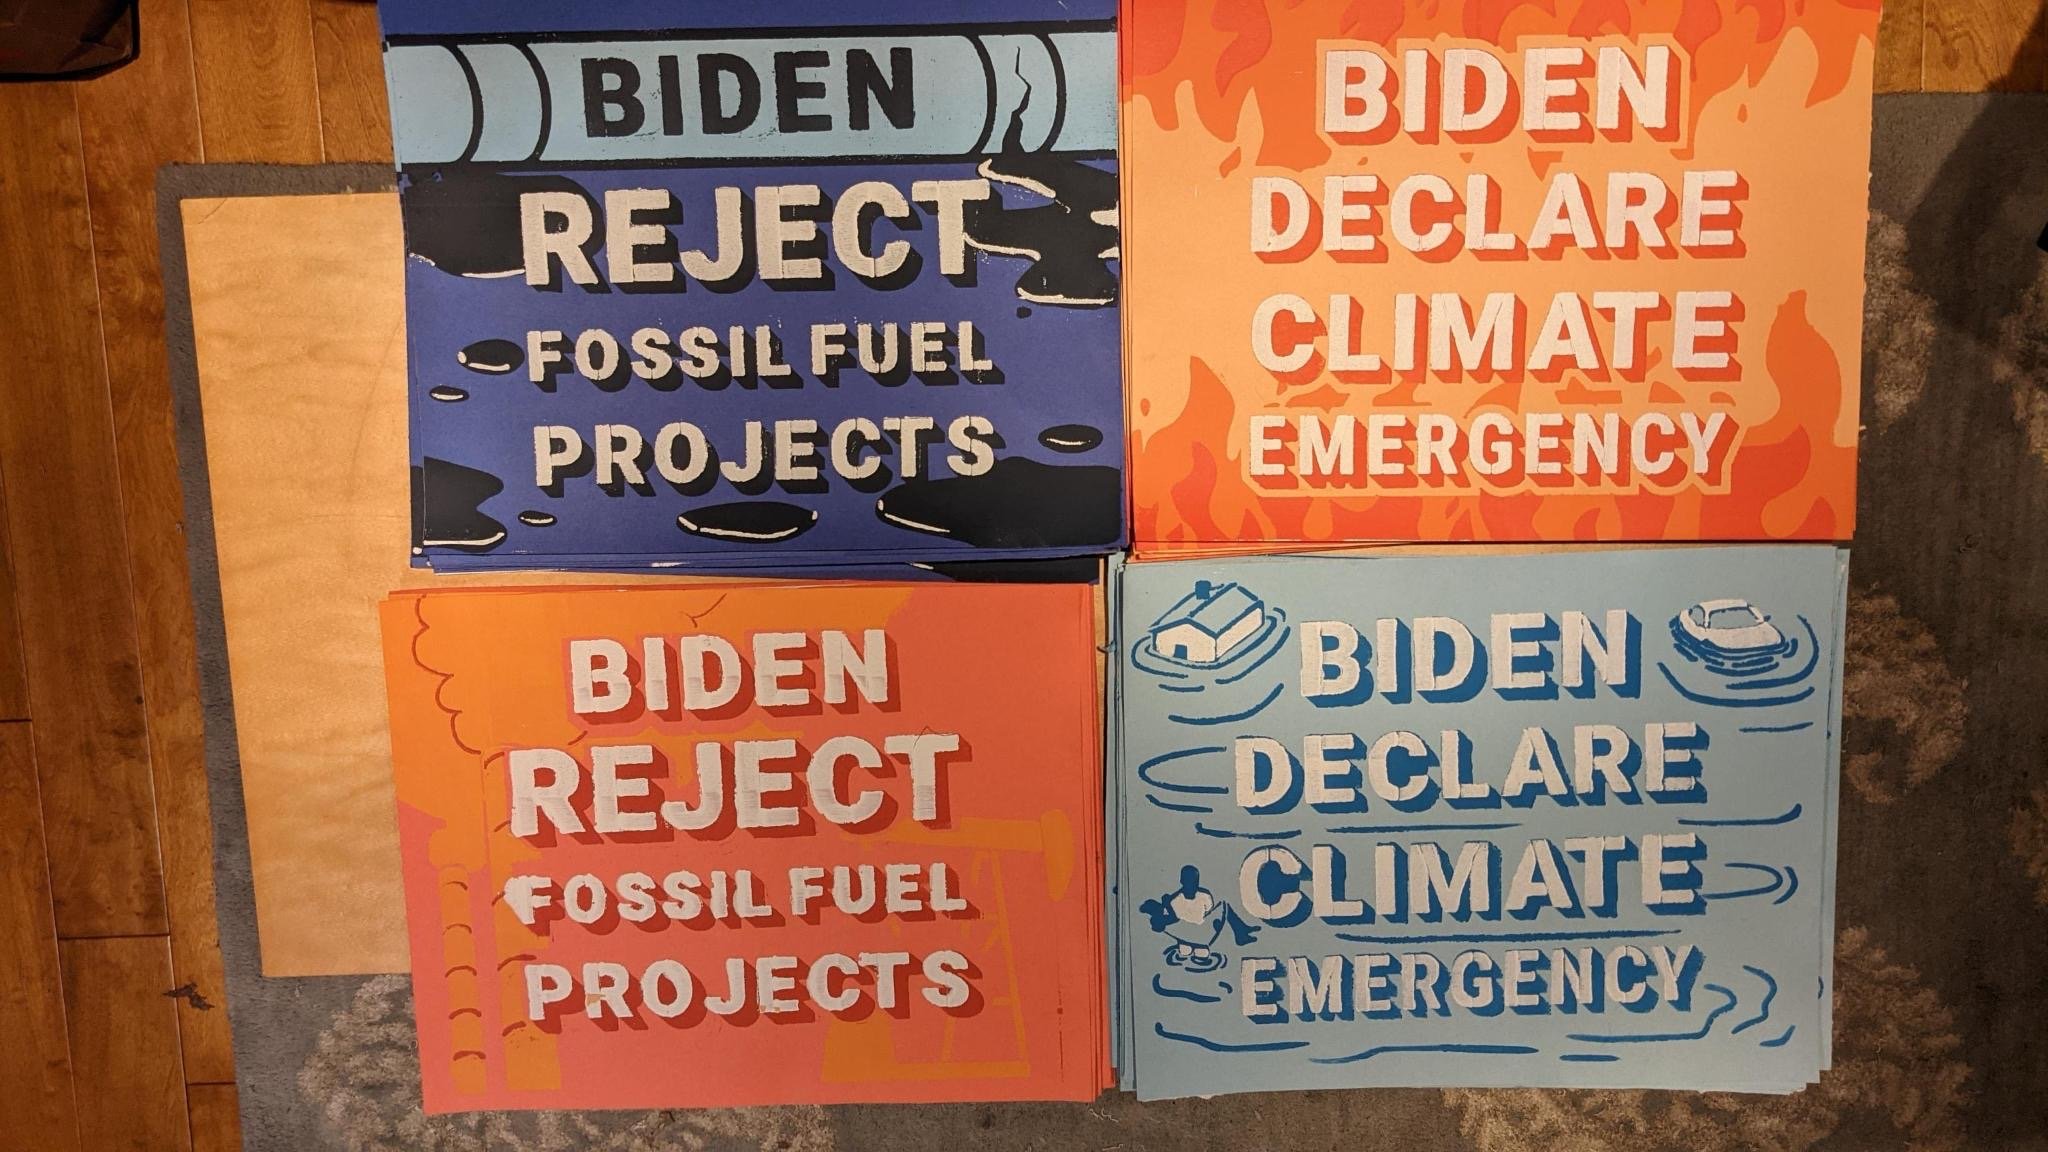 People Vs. Fossil Fuels, Washington D.C., 2021 (Co-designed with Izzy Harrison)